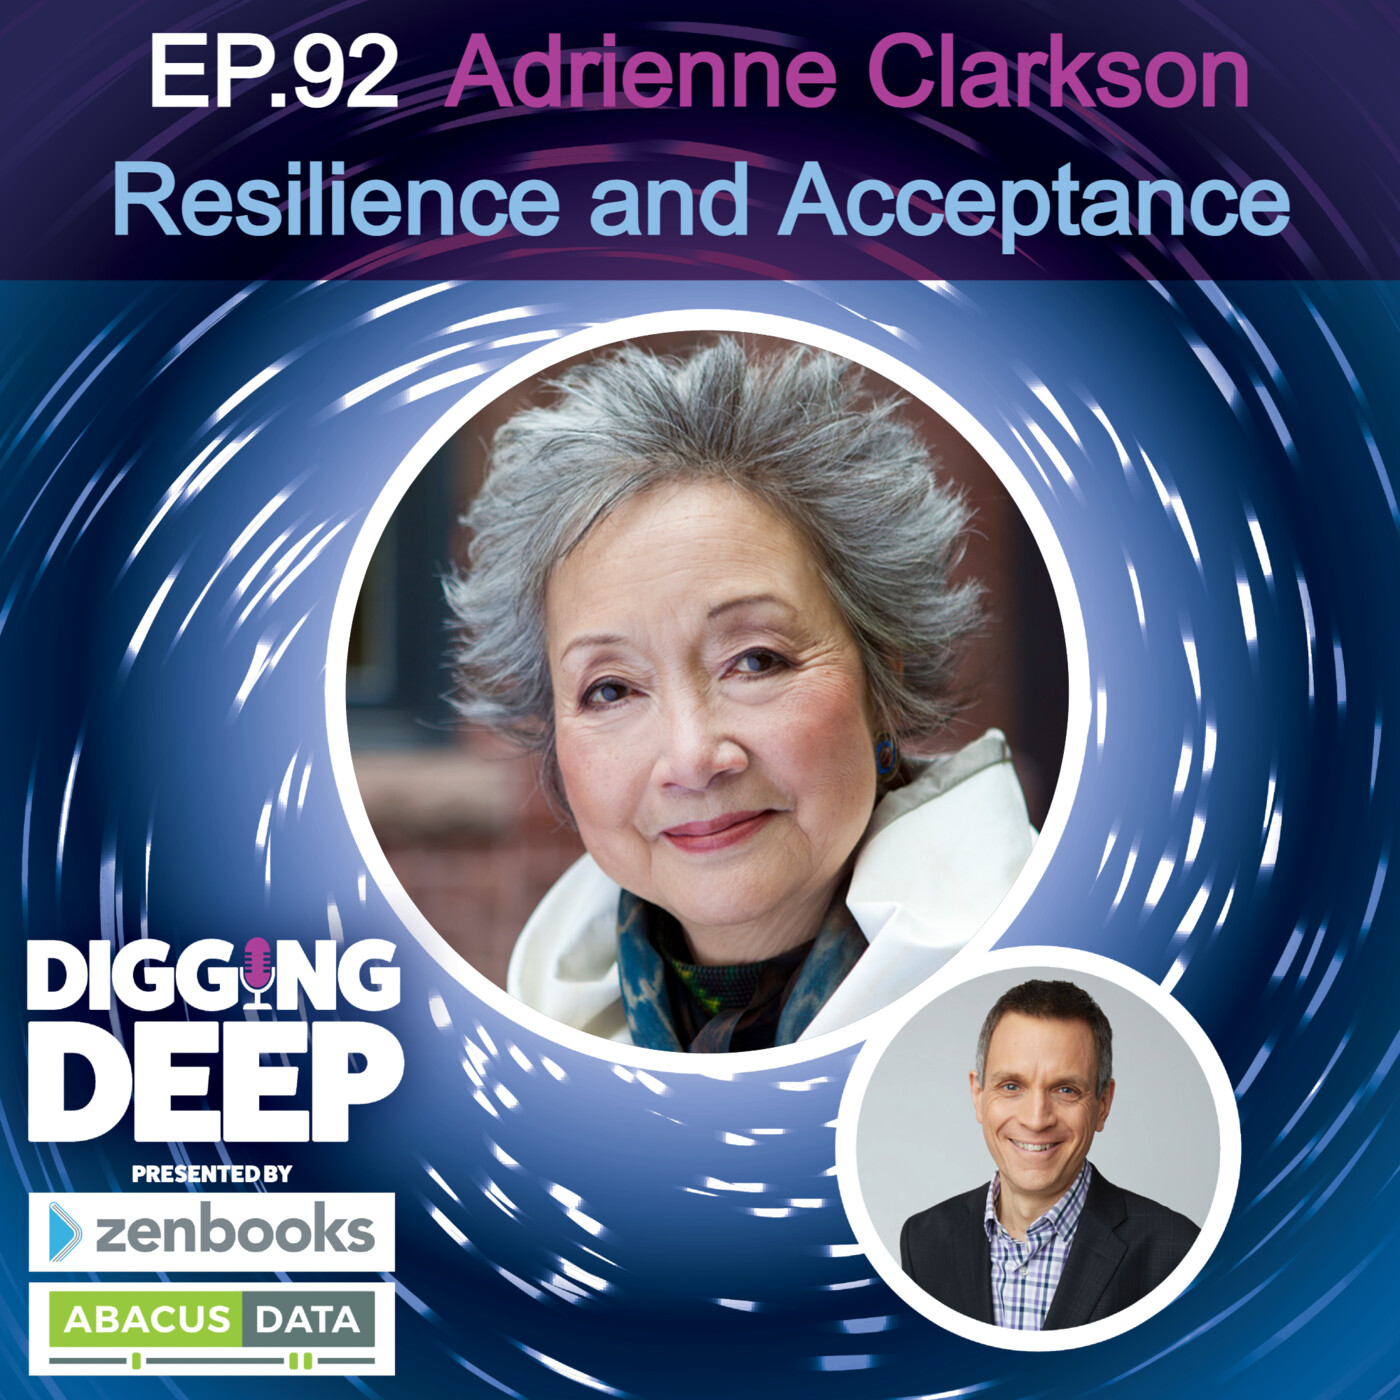 Adrienne Clarkson: Resilience and Acceptance